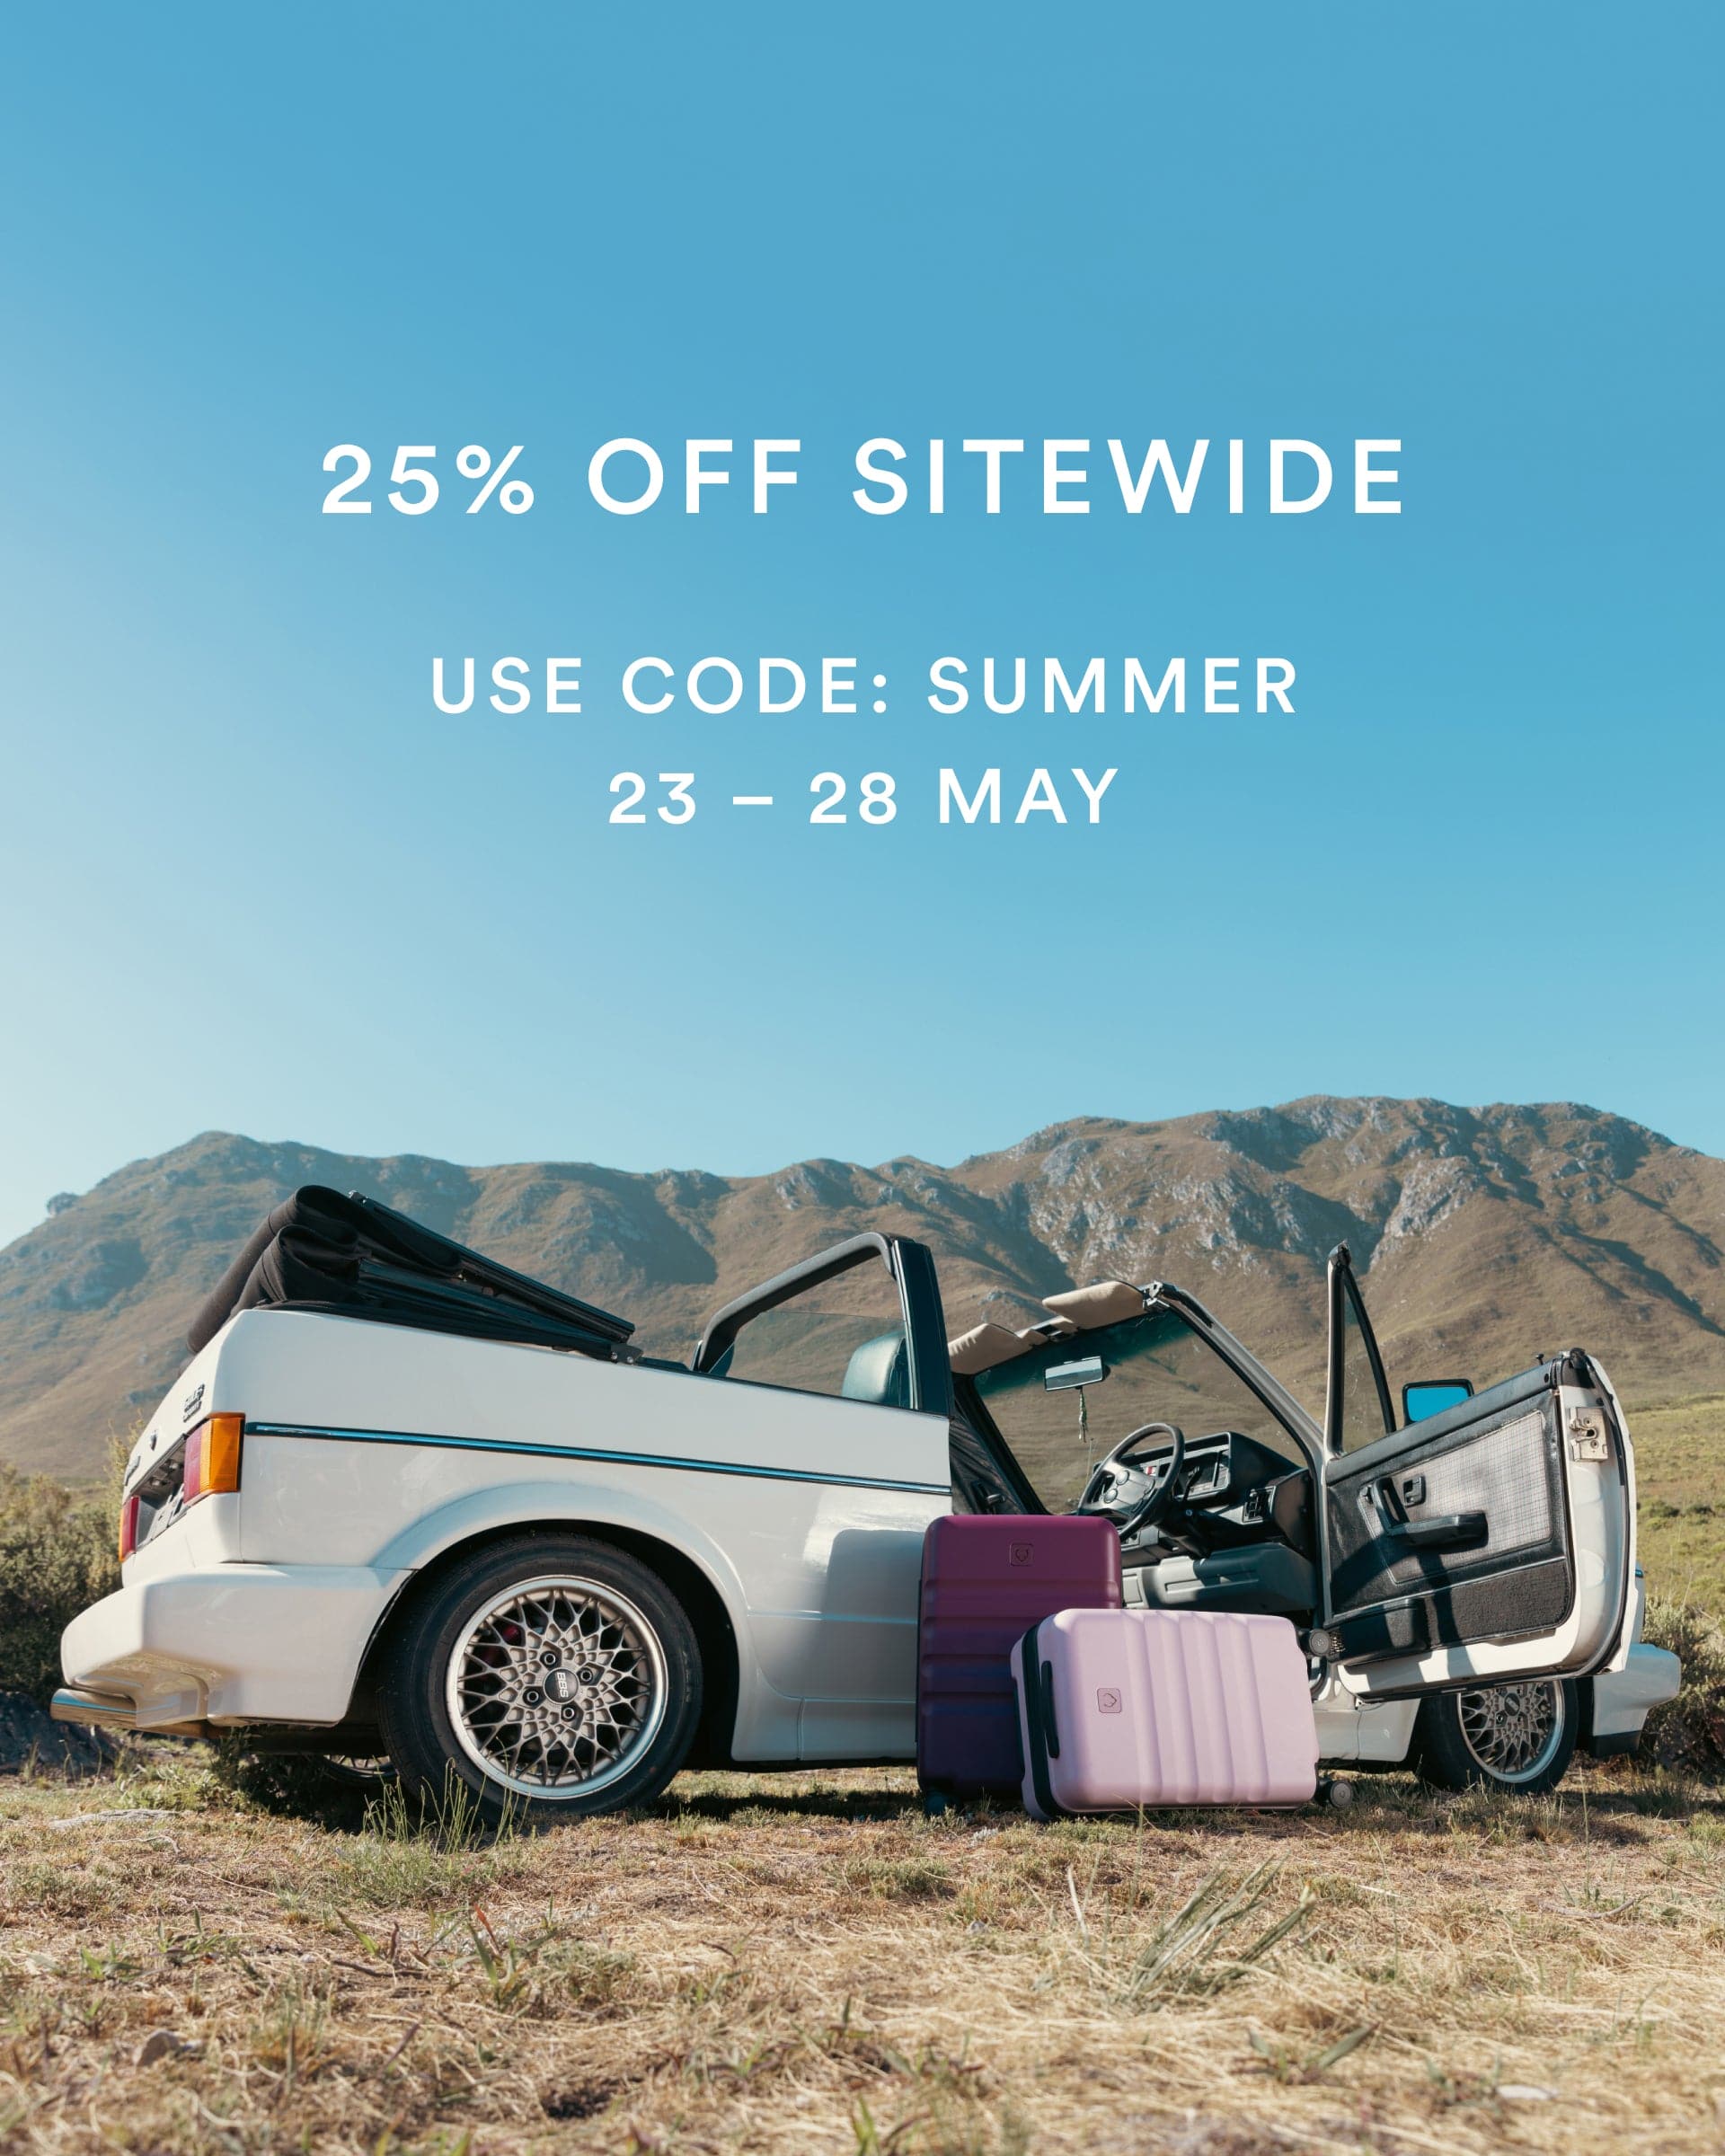 Antler UK Luggage -  25% off Sitewide - featured